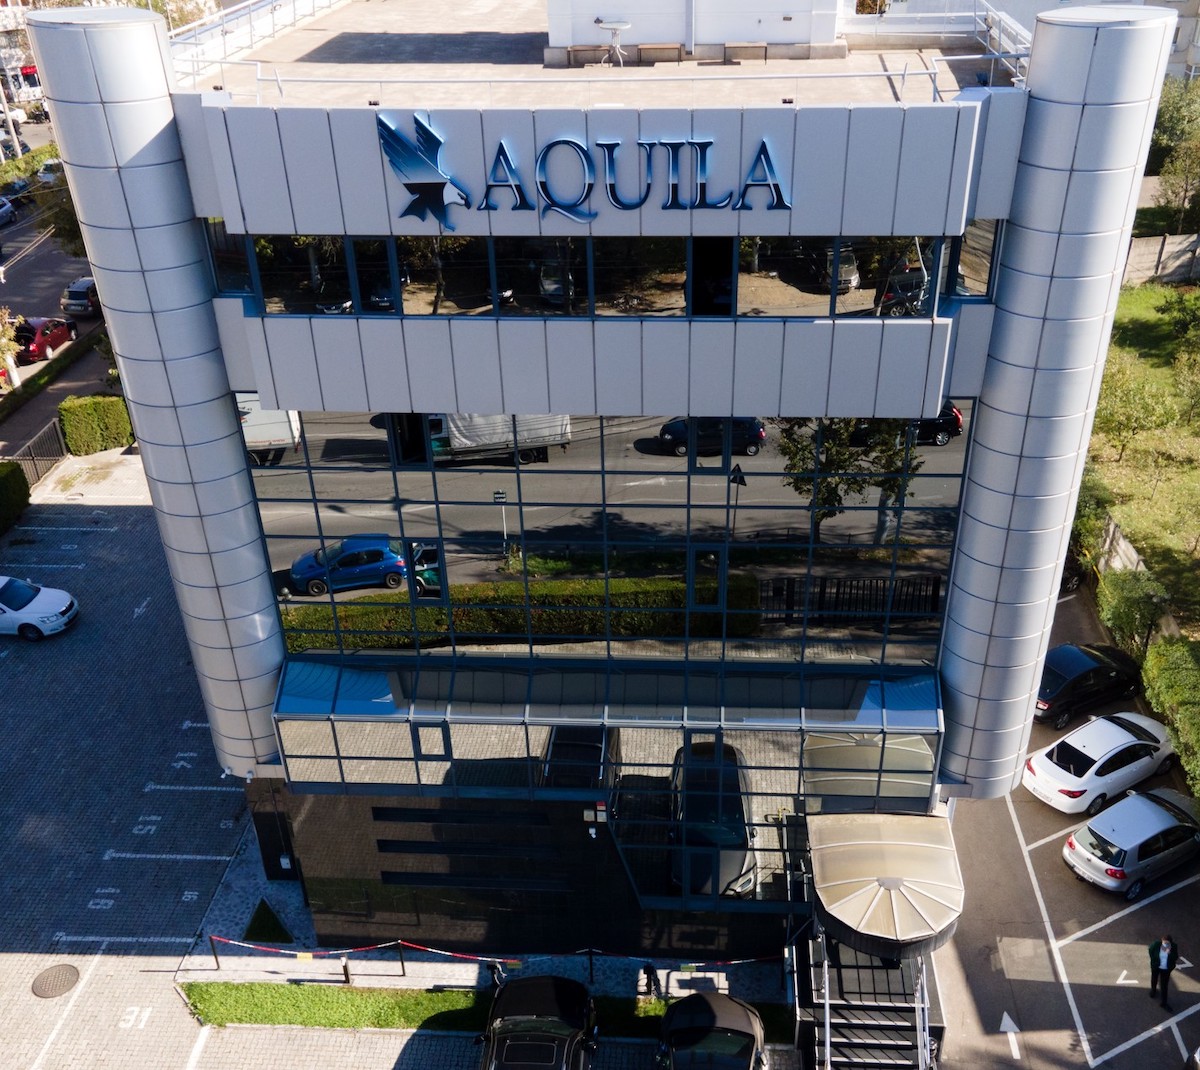 Romanian consumer goods distributor Aquila concludes its first acquisition since going public